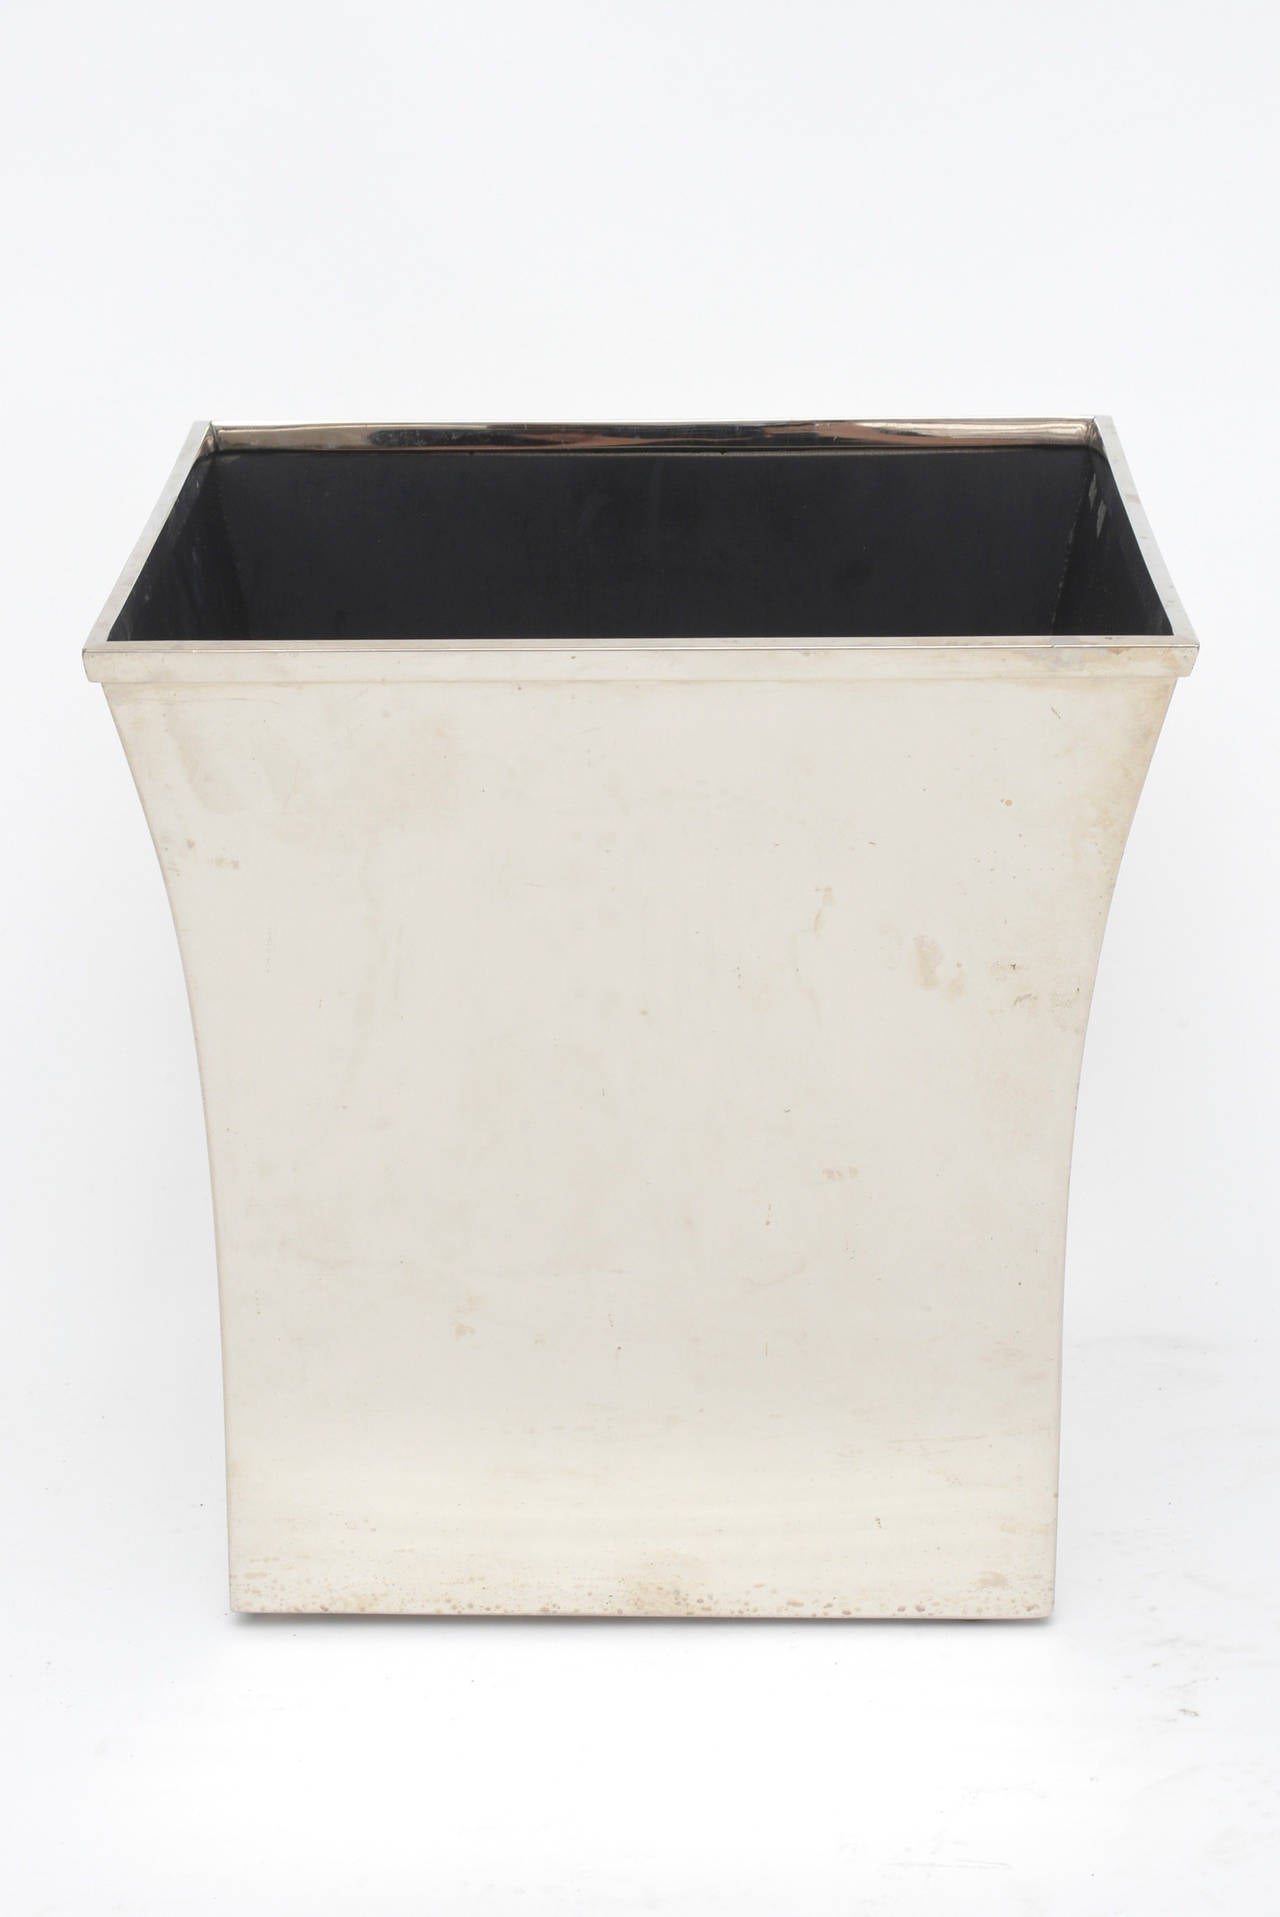 Nothing says confidence like a great wastebasket.
Heavy Stainless Steel